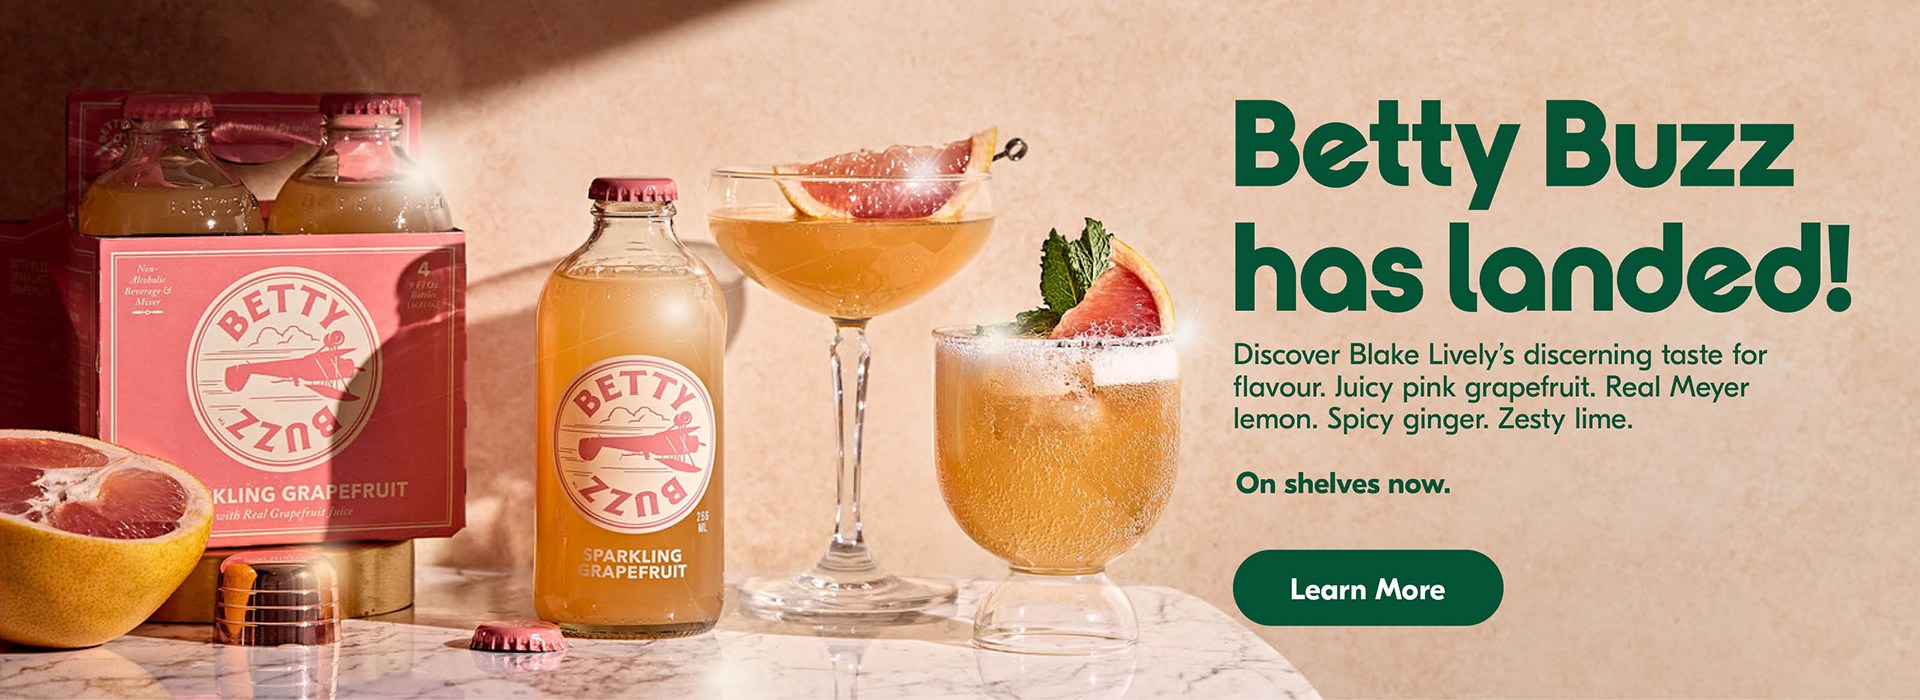 The following image contains the text, " Betty Buzz has landed! Discover black lively's discerning taste for flavour. Juicy pink grapefruit. Real Meyer lemon. Spicy ginger. Zesty lime. It is on shelves now, along with the Learn More button."